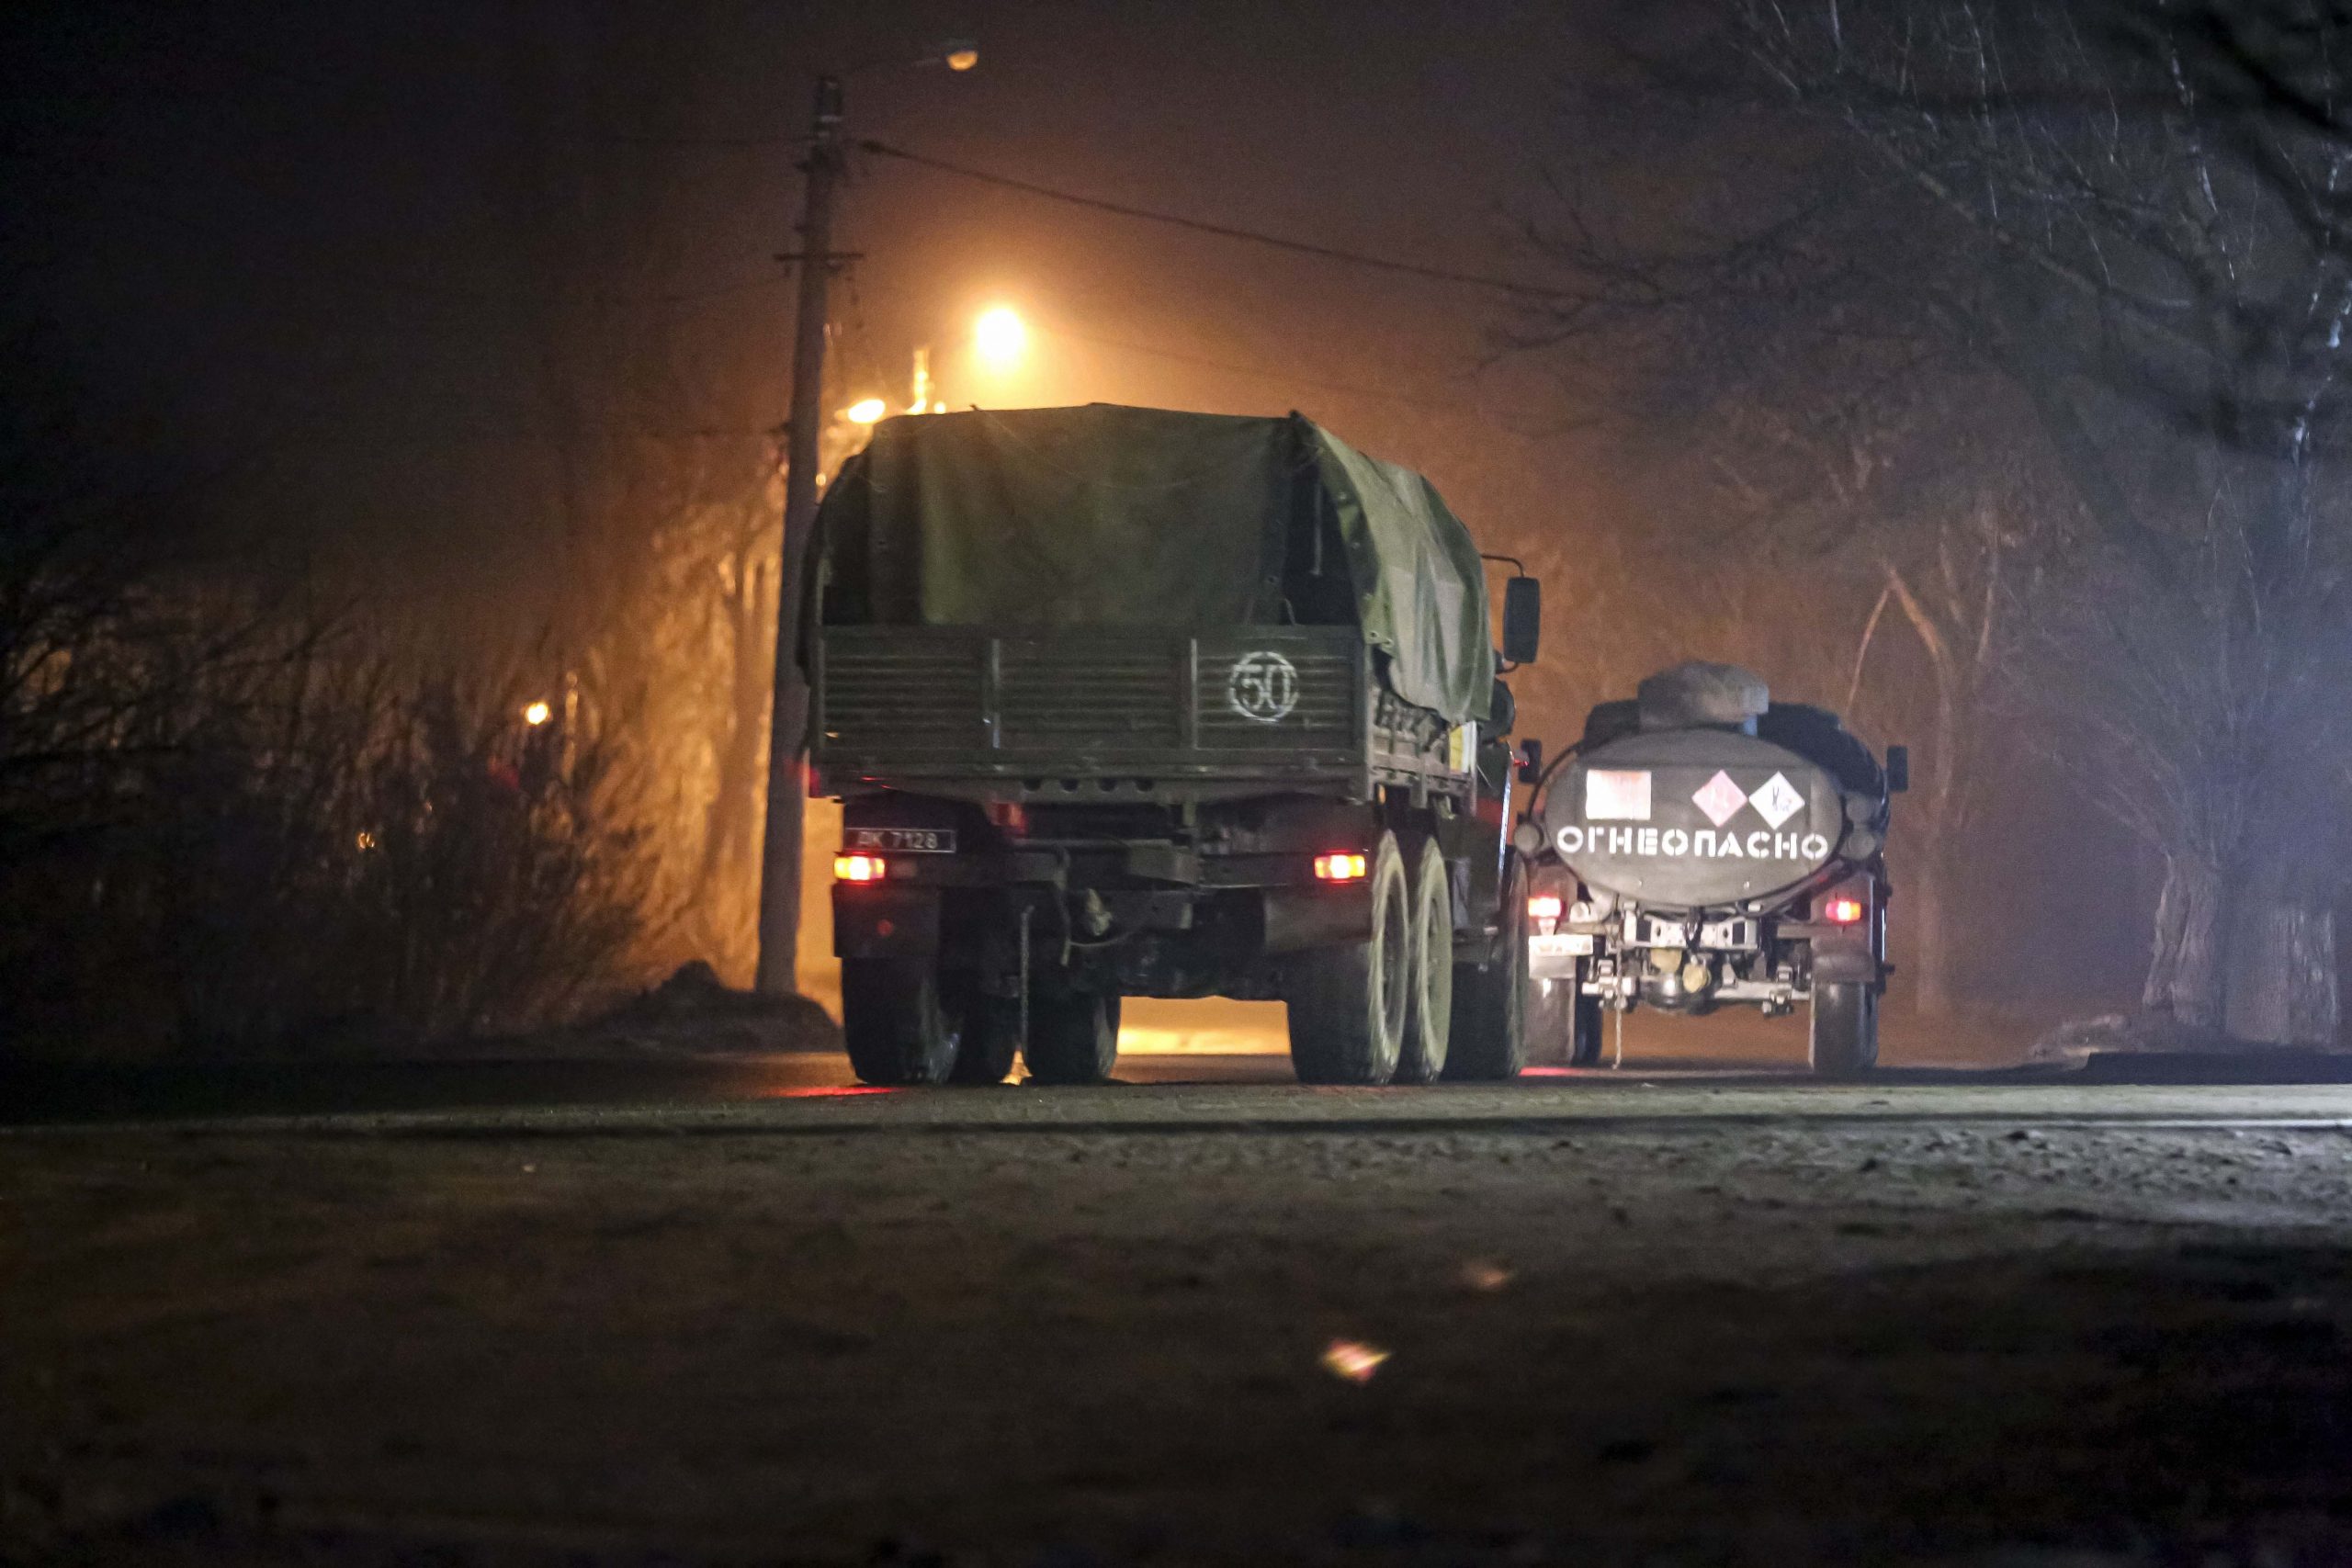 Russian forces moving into East Ukraine, claims Latvian Prime Minister